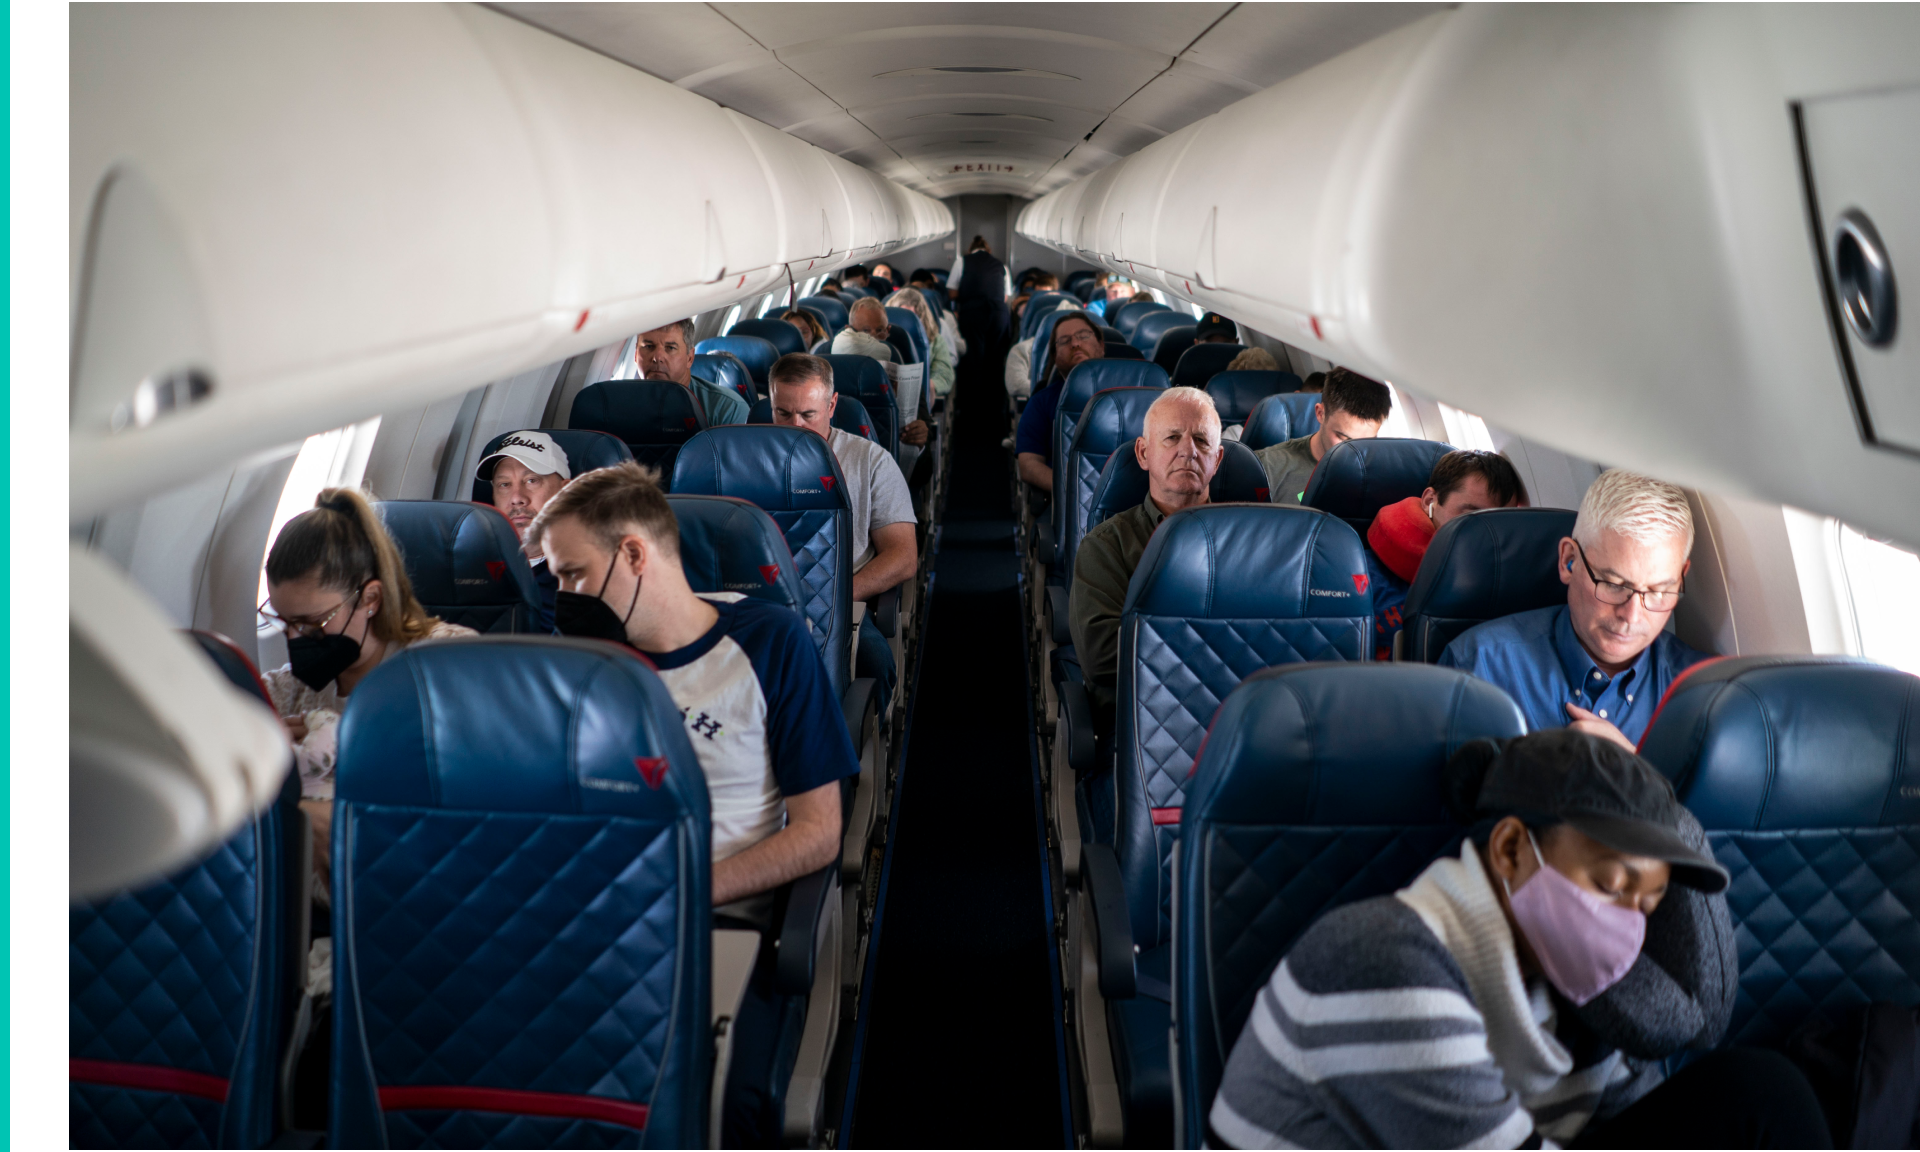 Passengers and flight attendants aboard a flight from LaGuardia Airport bound for Kansas City International Airport on Wednesday, May 4, 2022 in Queens, NY